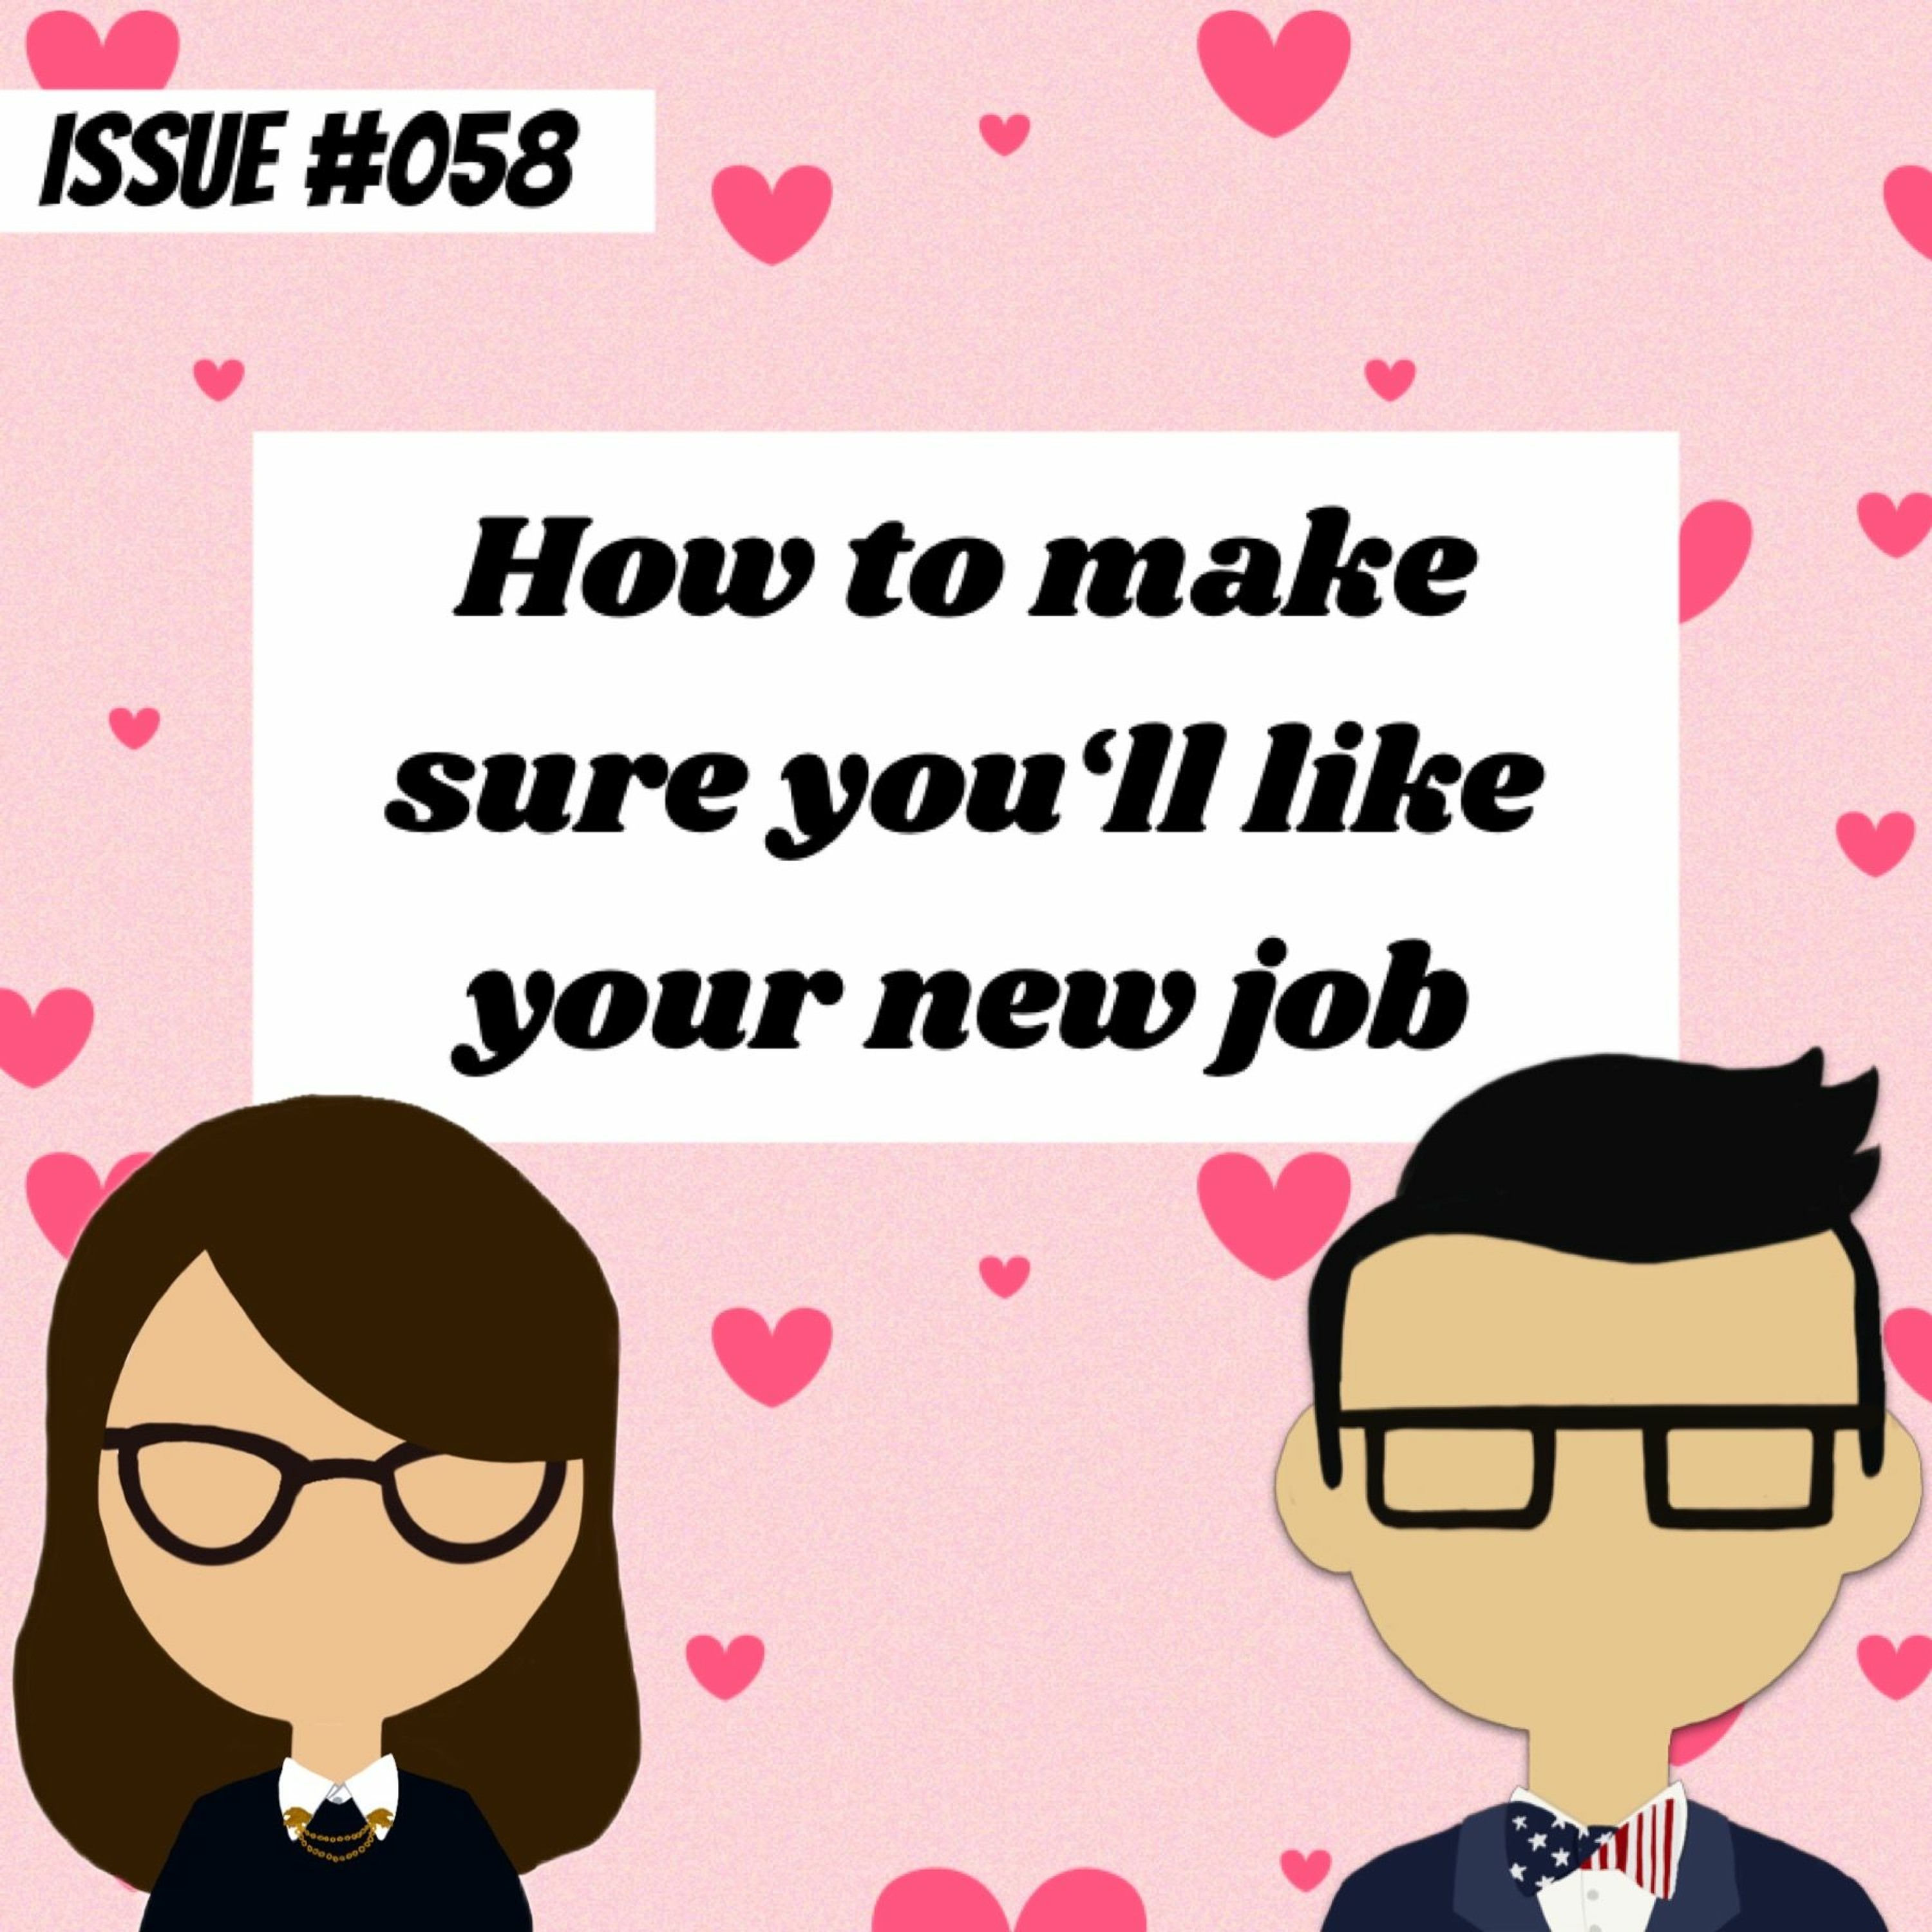 How to make sure you’ll like your new job